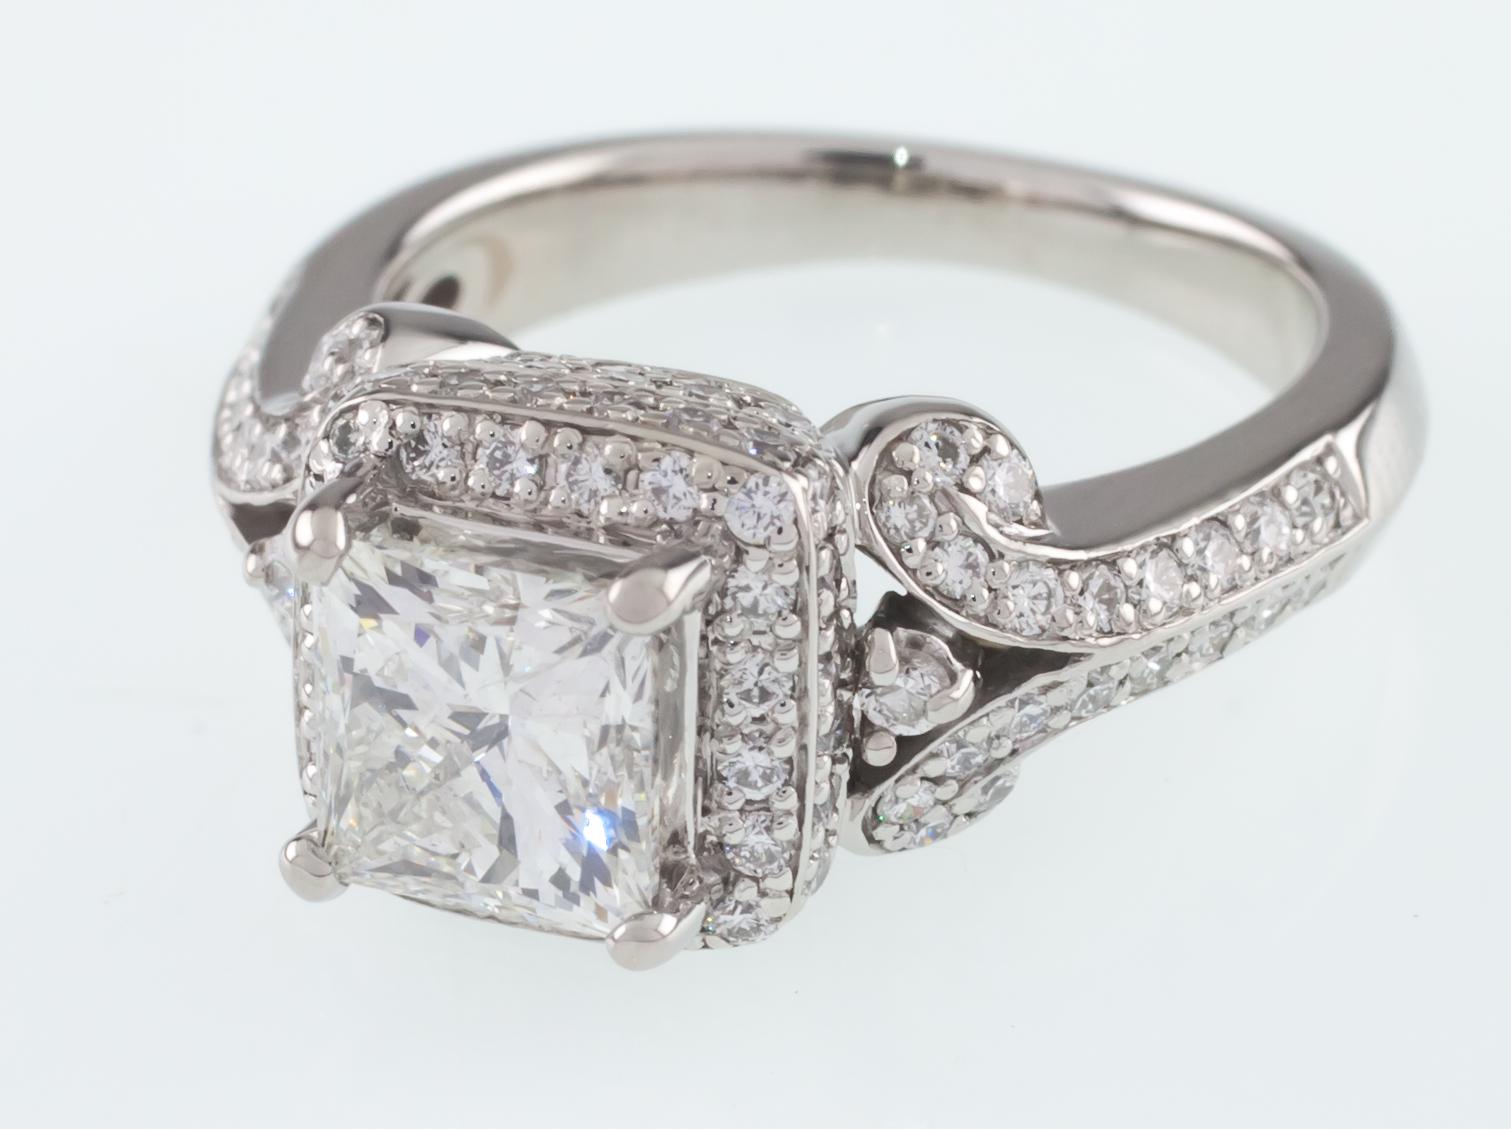 Modern 1.50 Carat Princess Cut Diamond Solitaire Ring with Accent Stones in Platinum For Sale